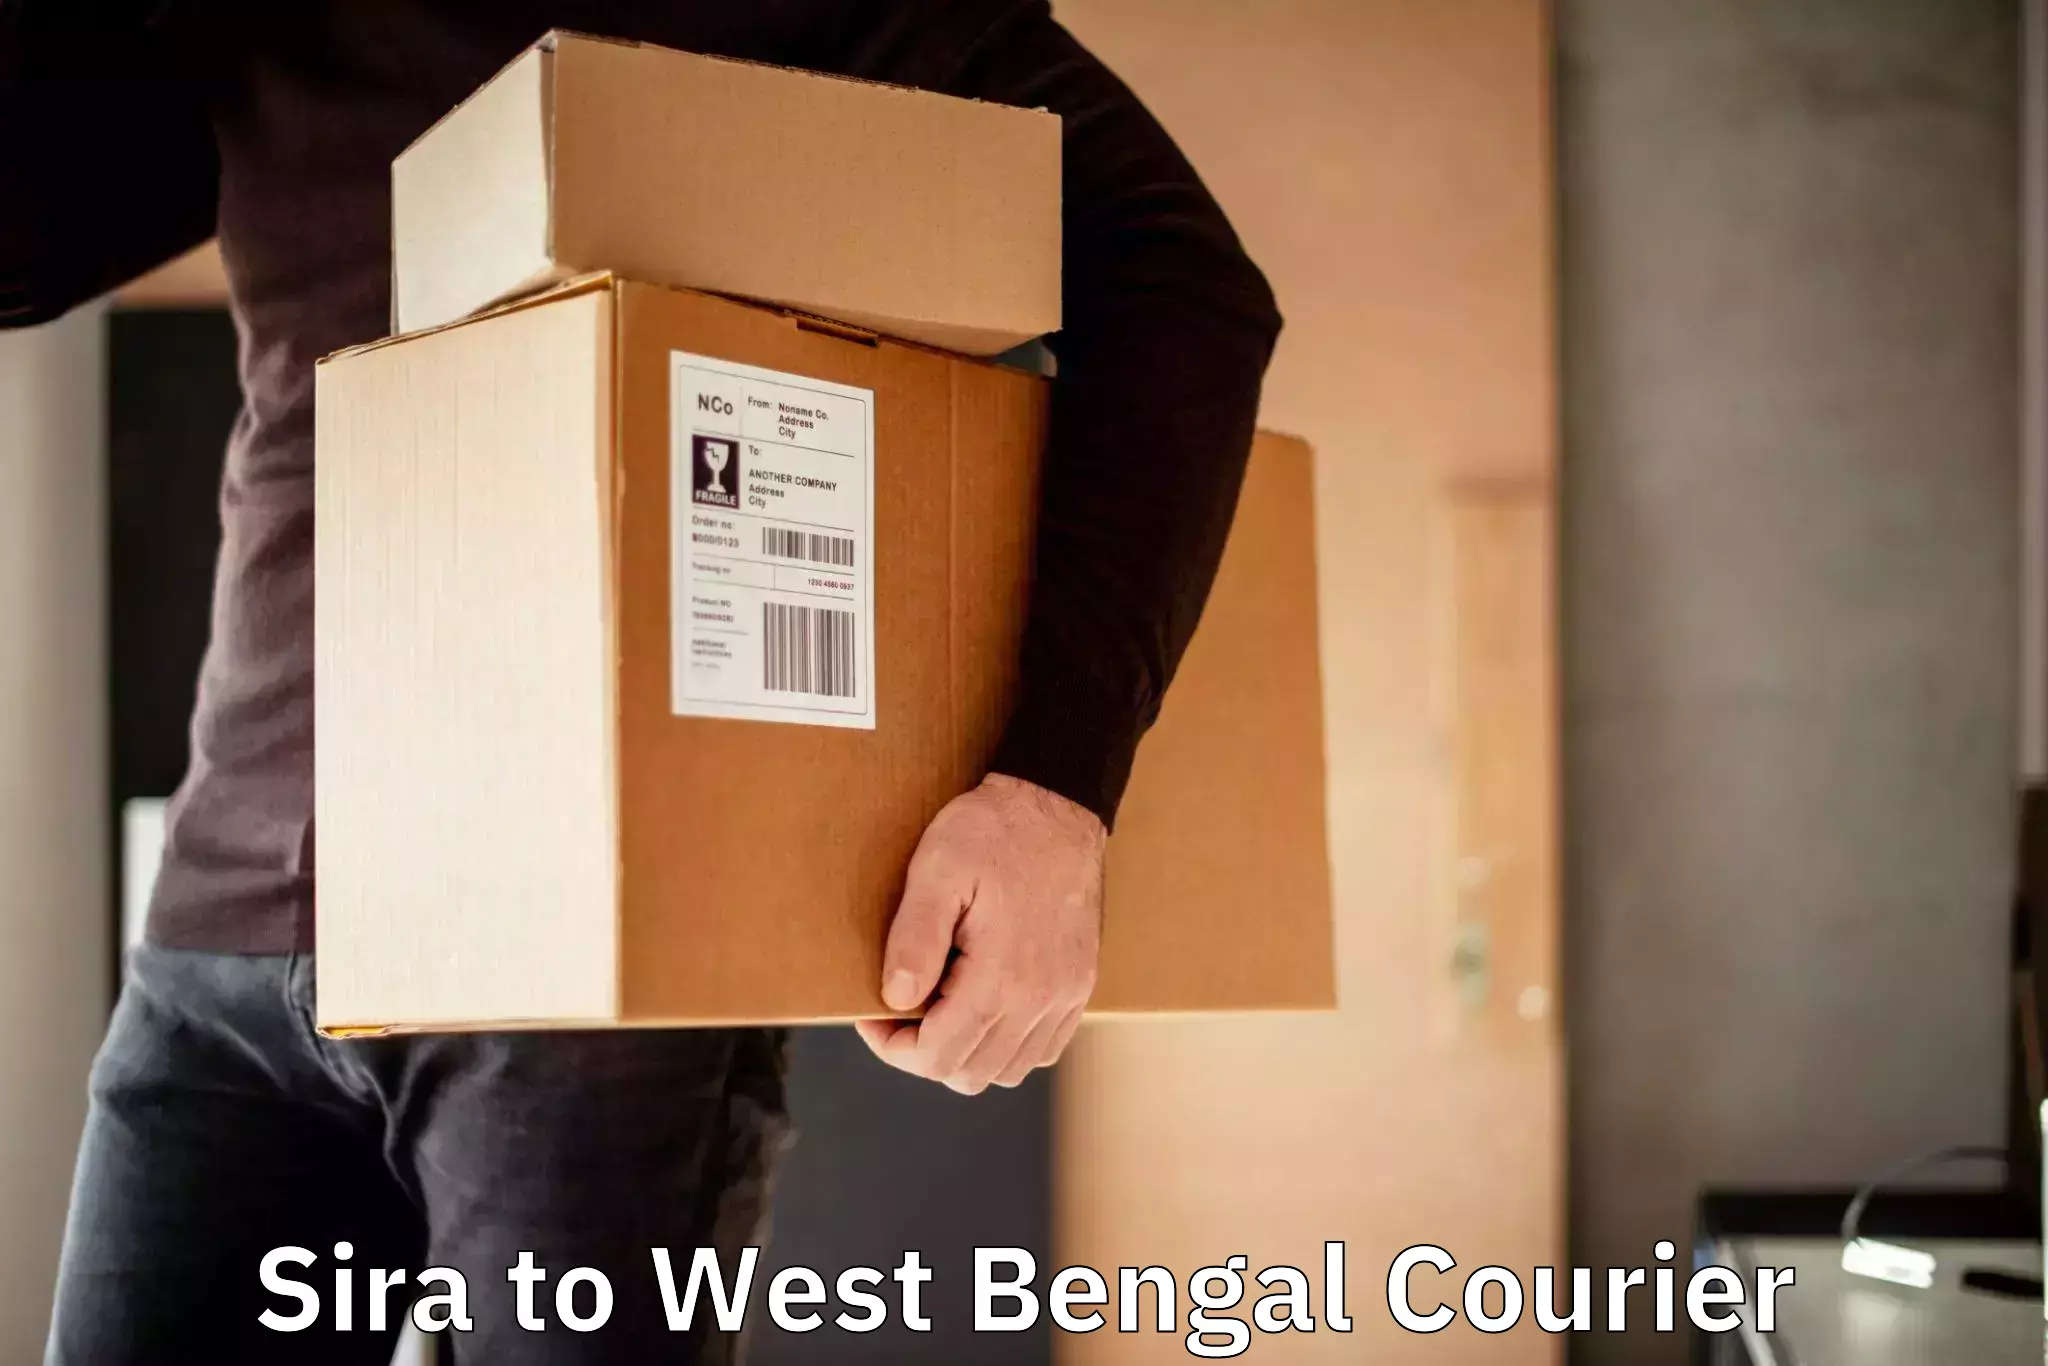 Express delivery network Sira to West Bengal